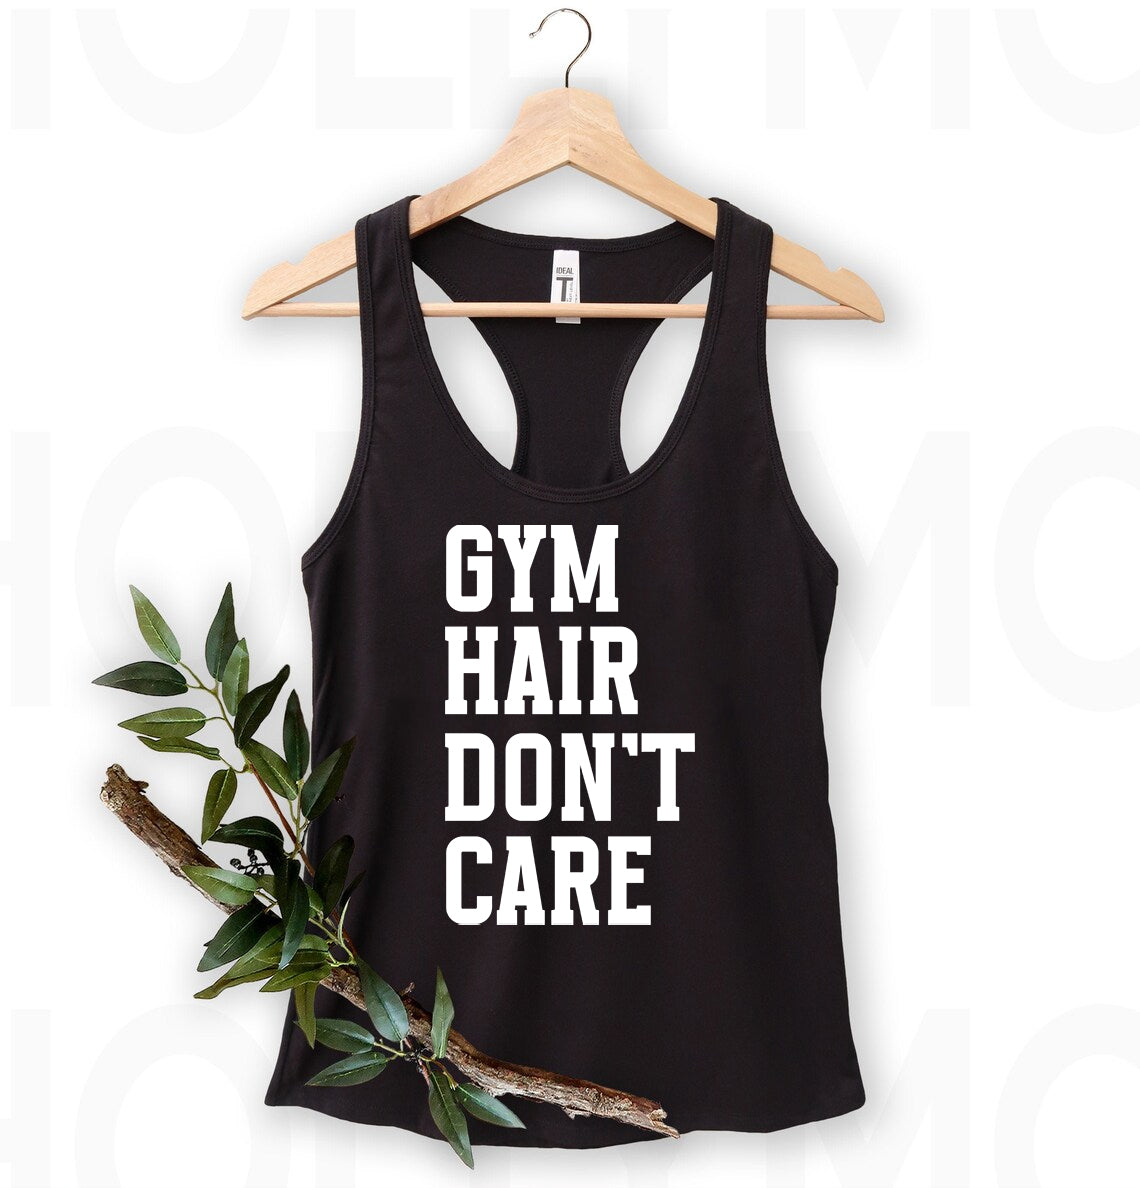 Gym Hair Don't Care Graphic Tee